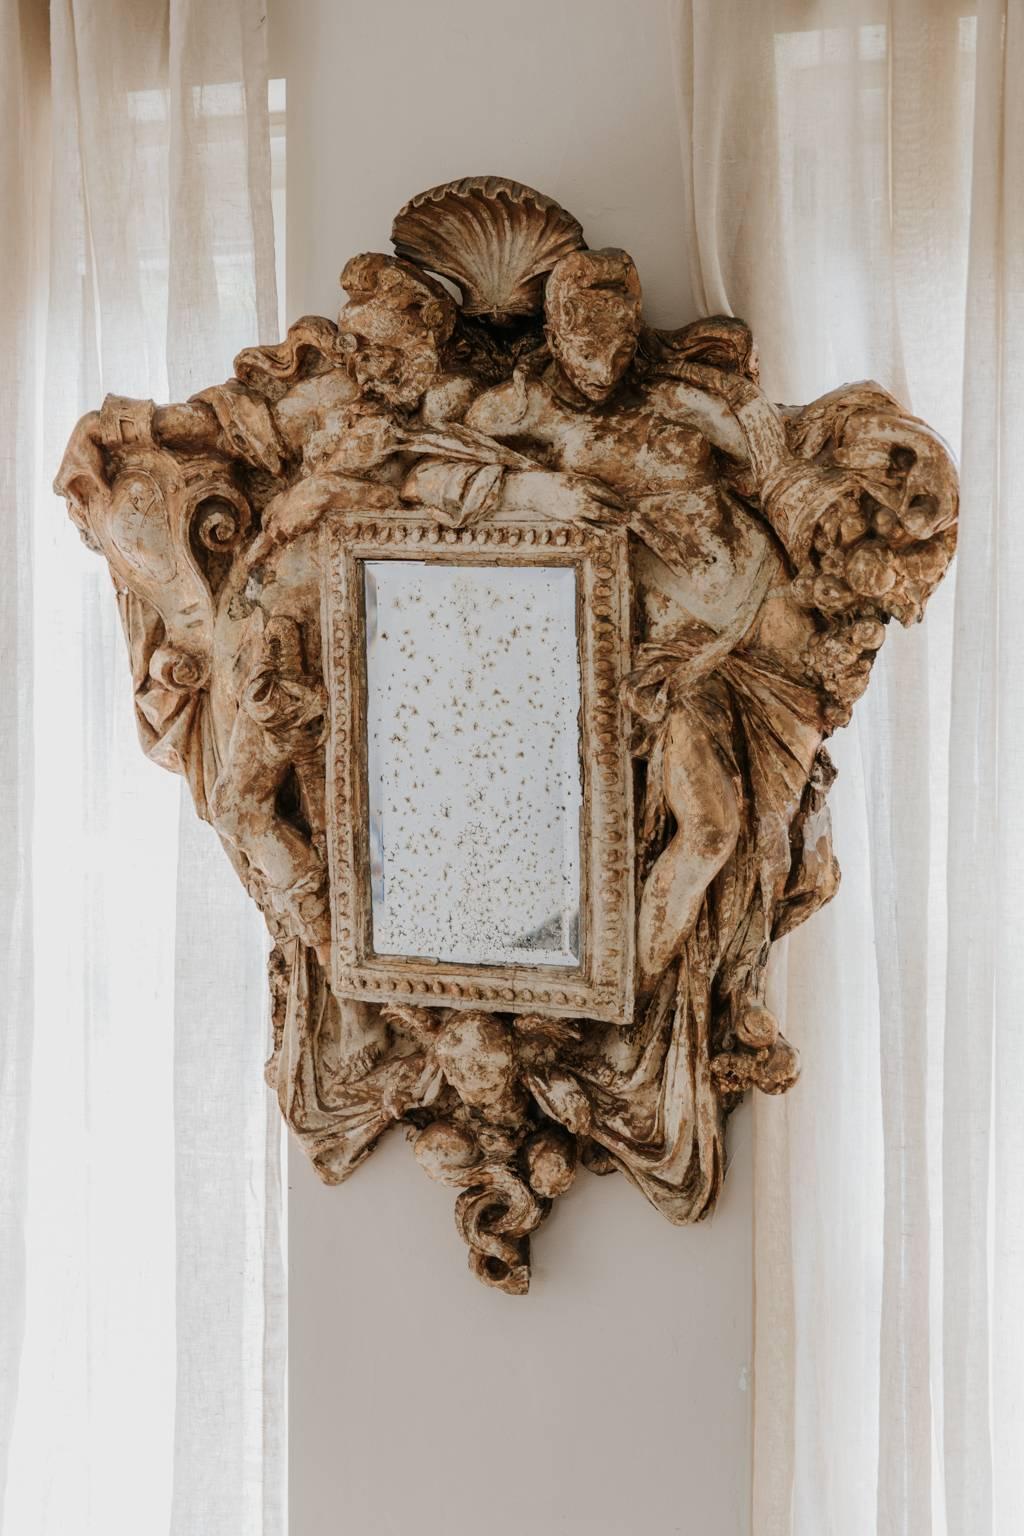 This is a very quirky 19th century mirror that once was part of the interior of a Parisian brothel, plaster with rests of old gilt, a male figure holding the inscription guerra and a female figure holding the inscription pace.